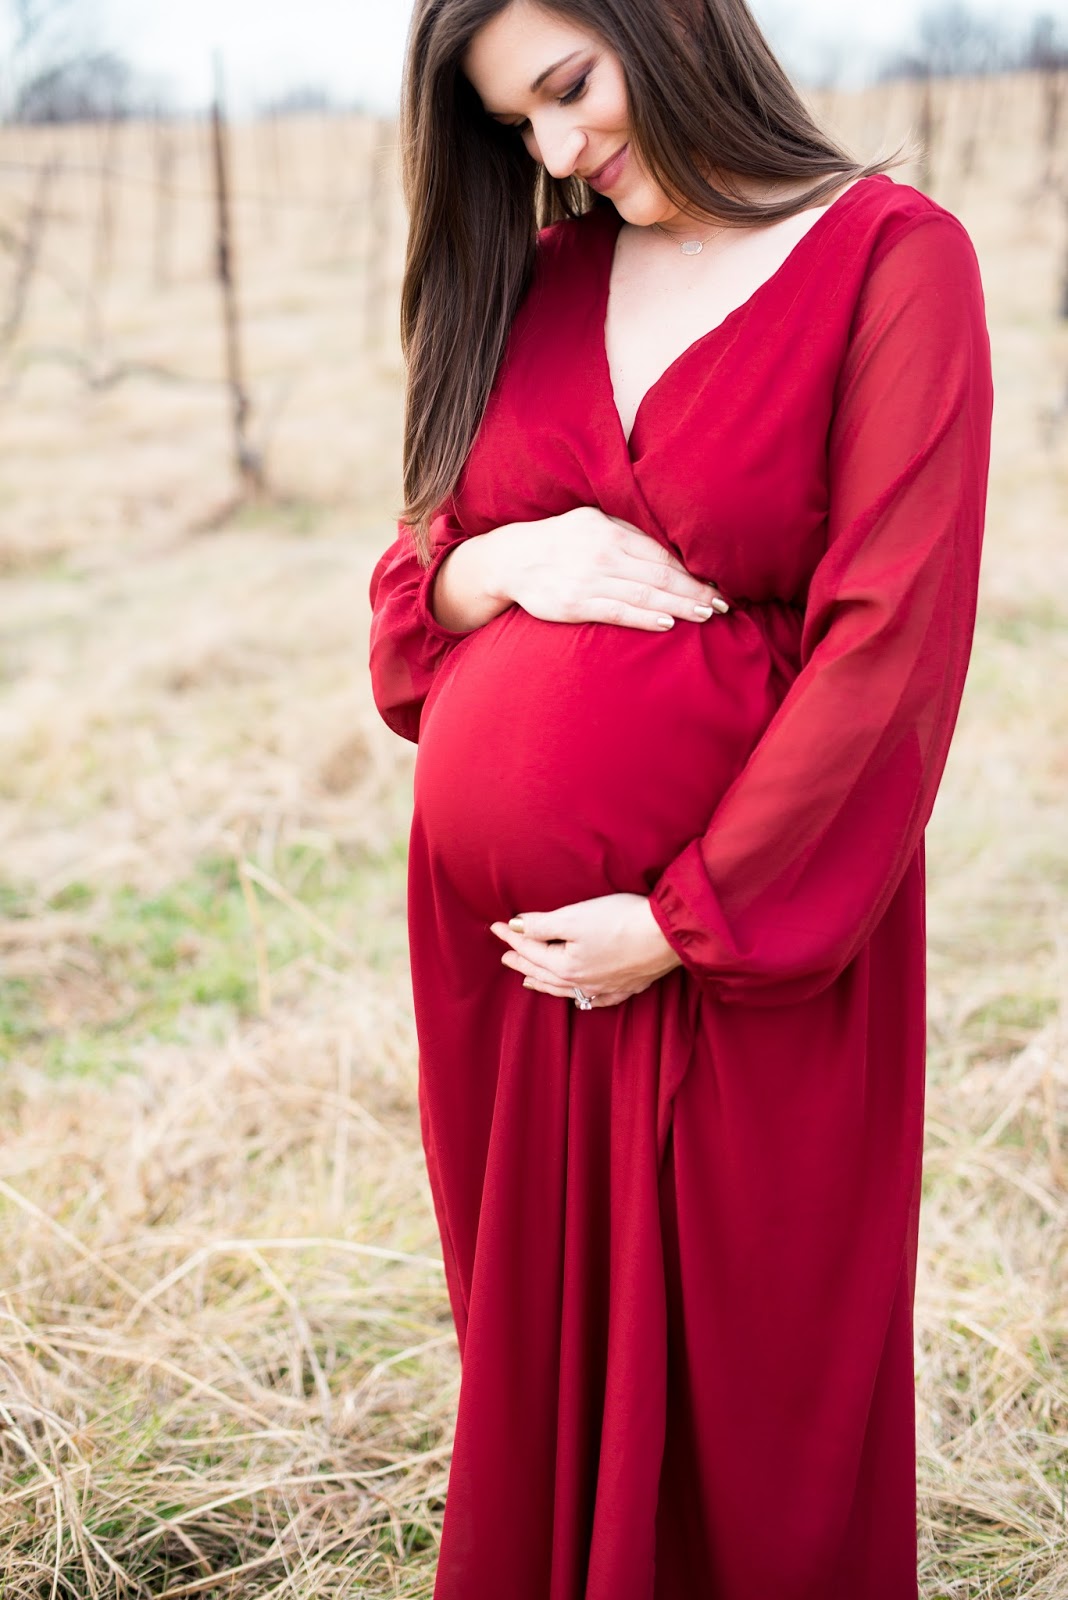 Our Winter Maternity Photos ~ Currently, Kelsie